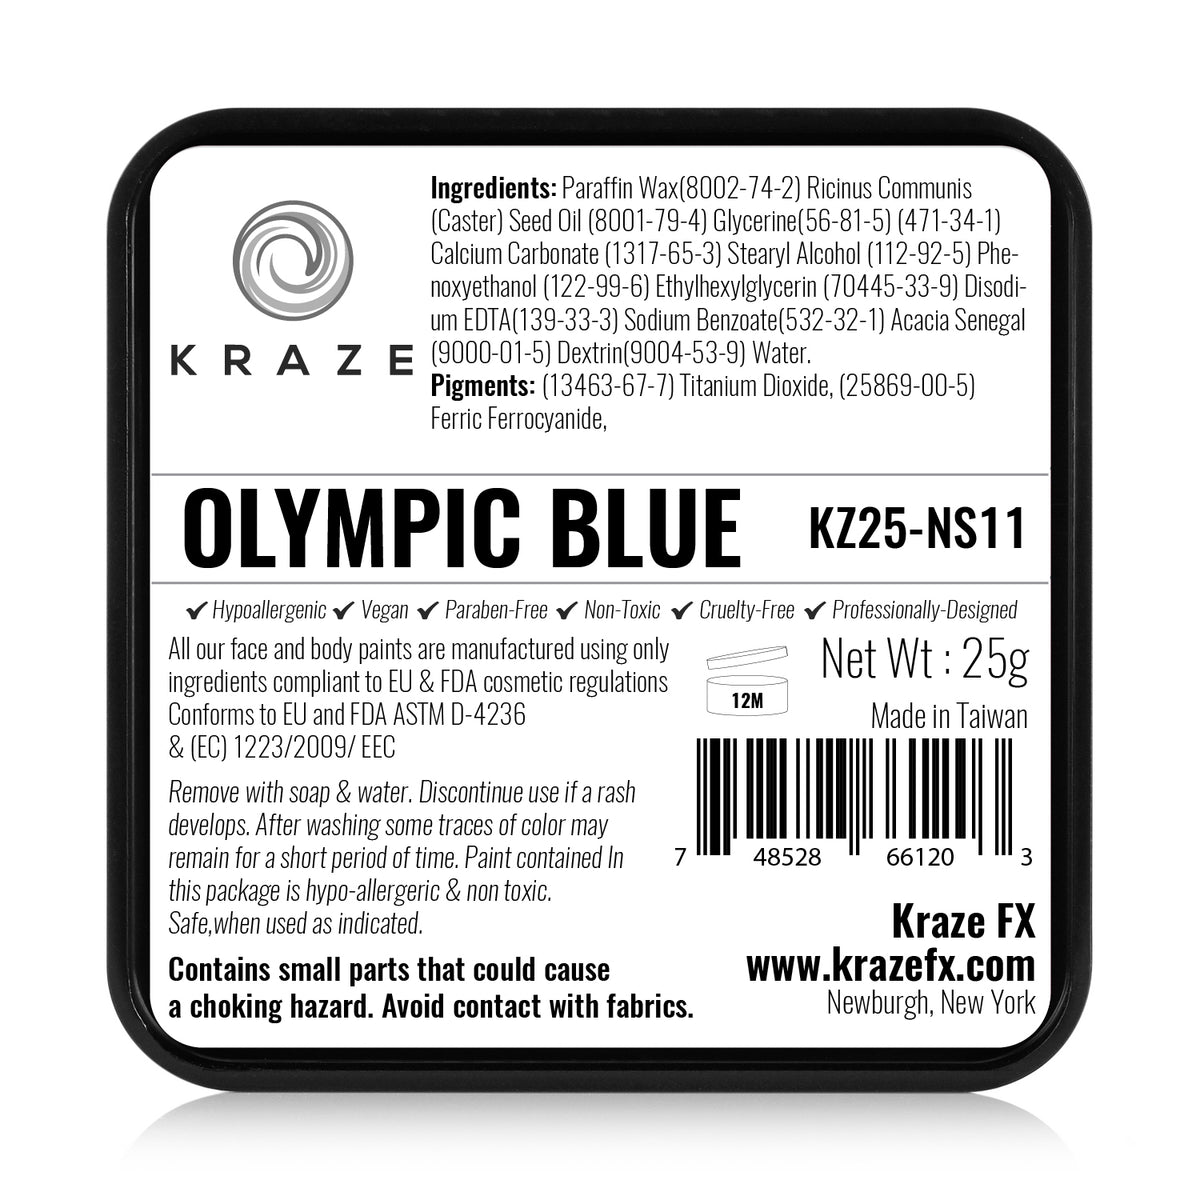 Kraze FX Face Paint - Non Staining - Olympic Blue (25 gm)